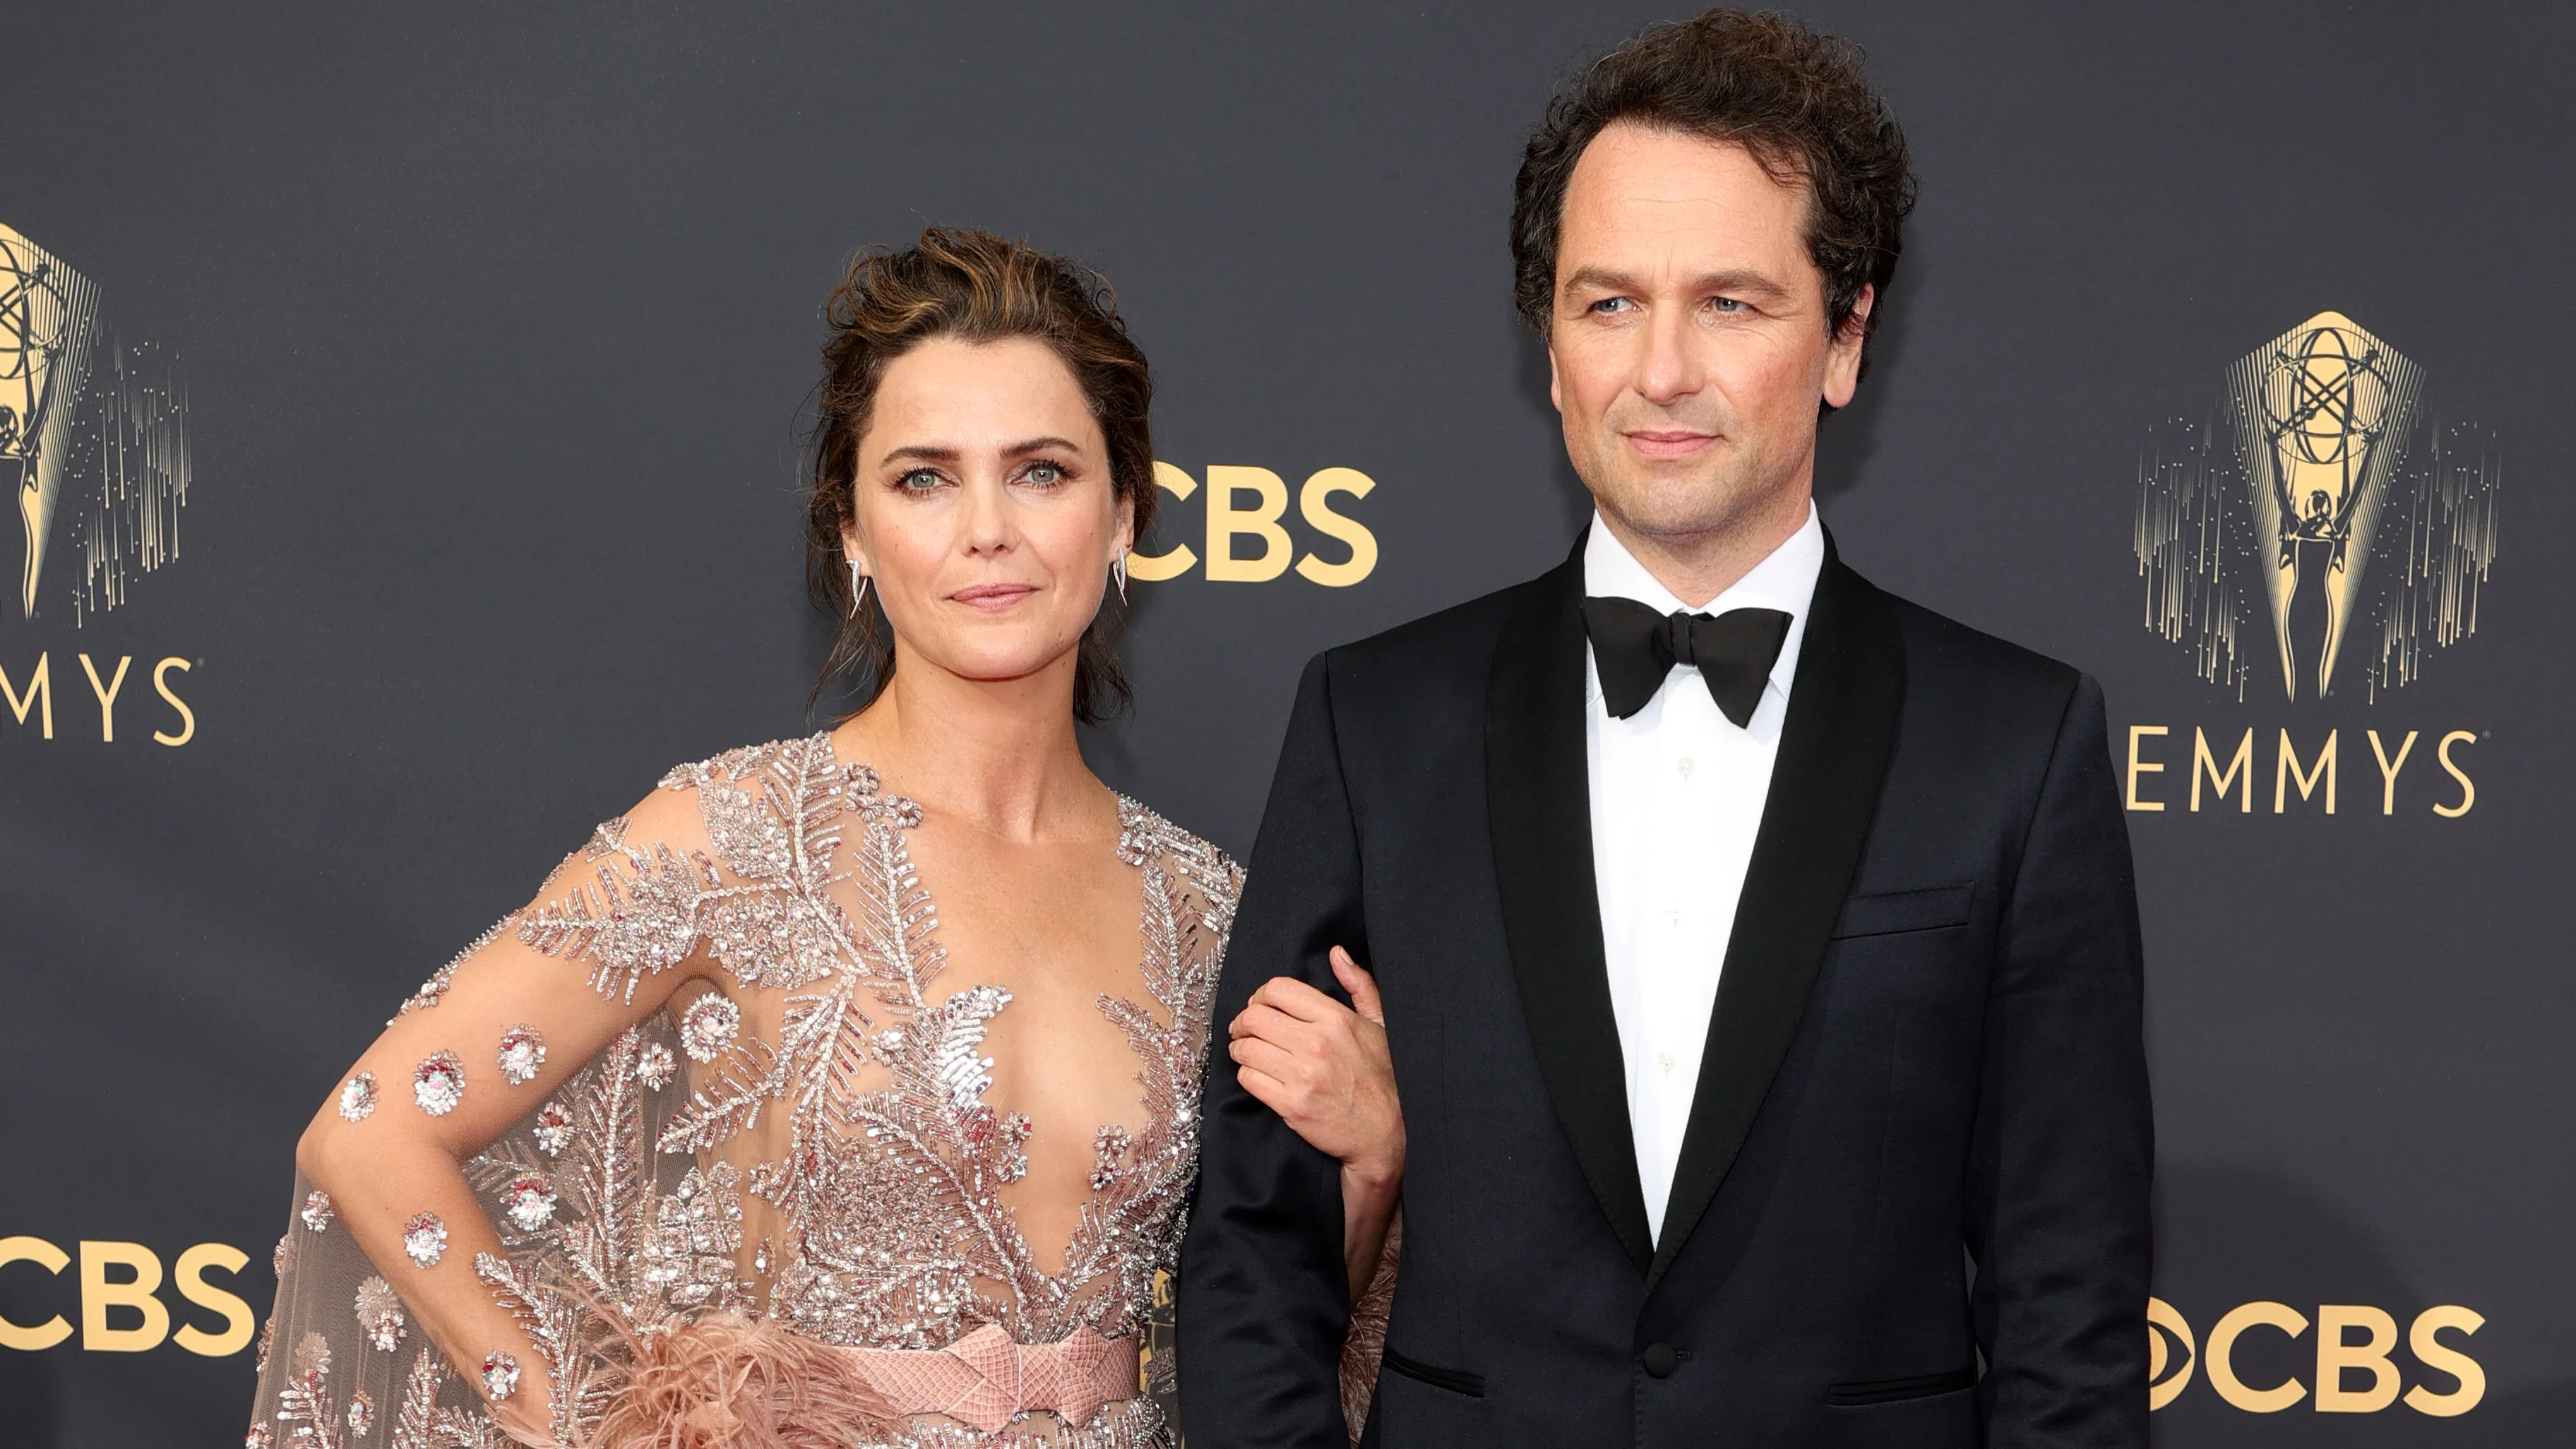 Keri Russell attends various social events with her partner Matthew Rhys